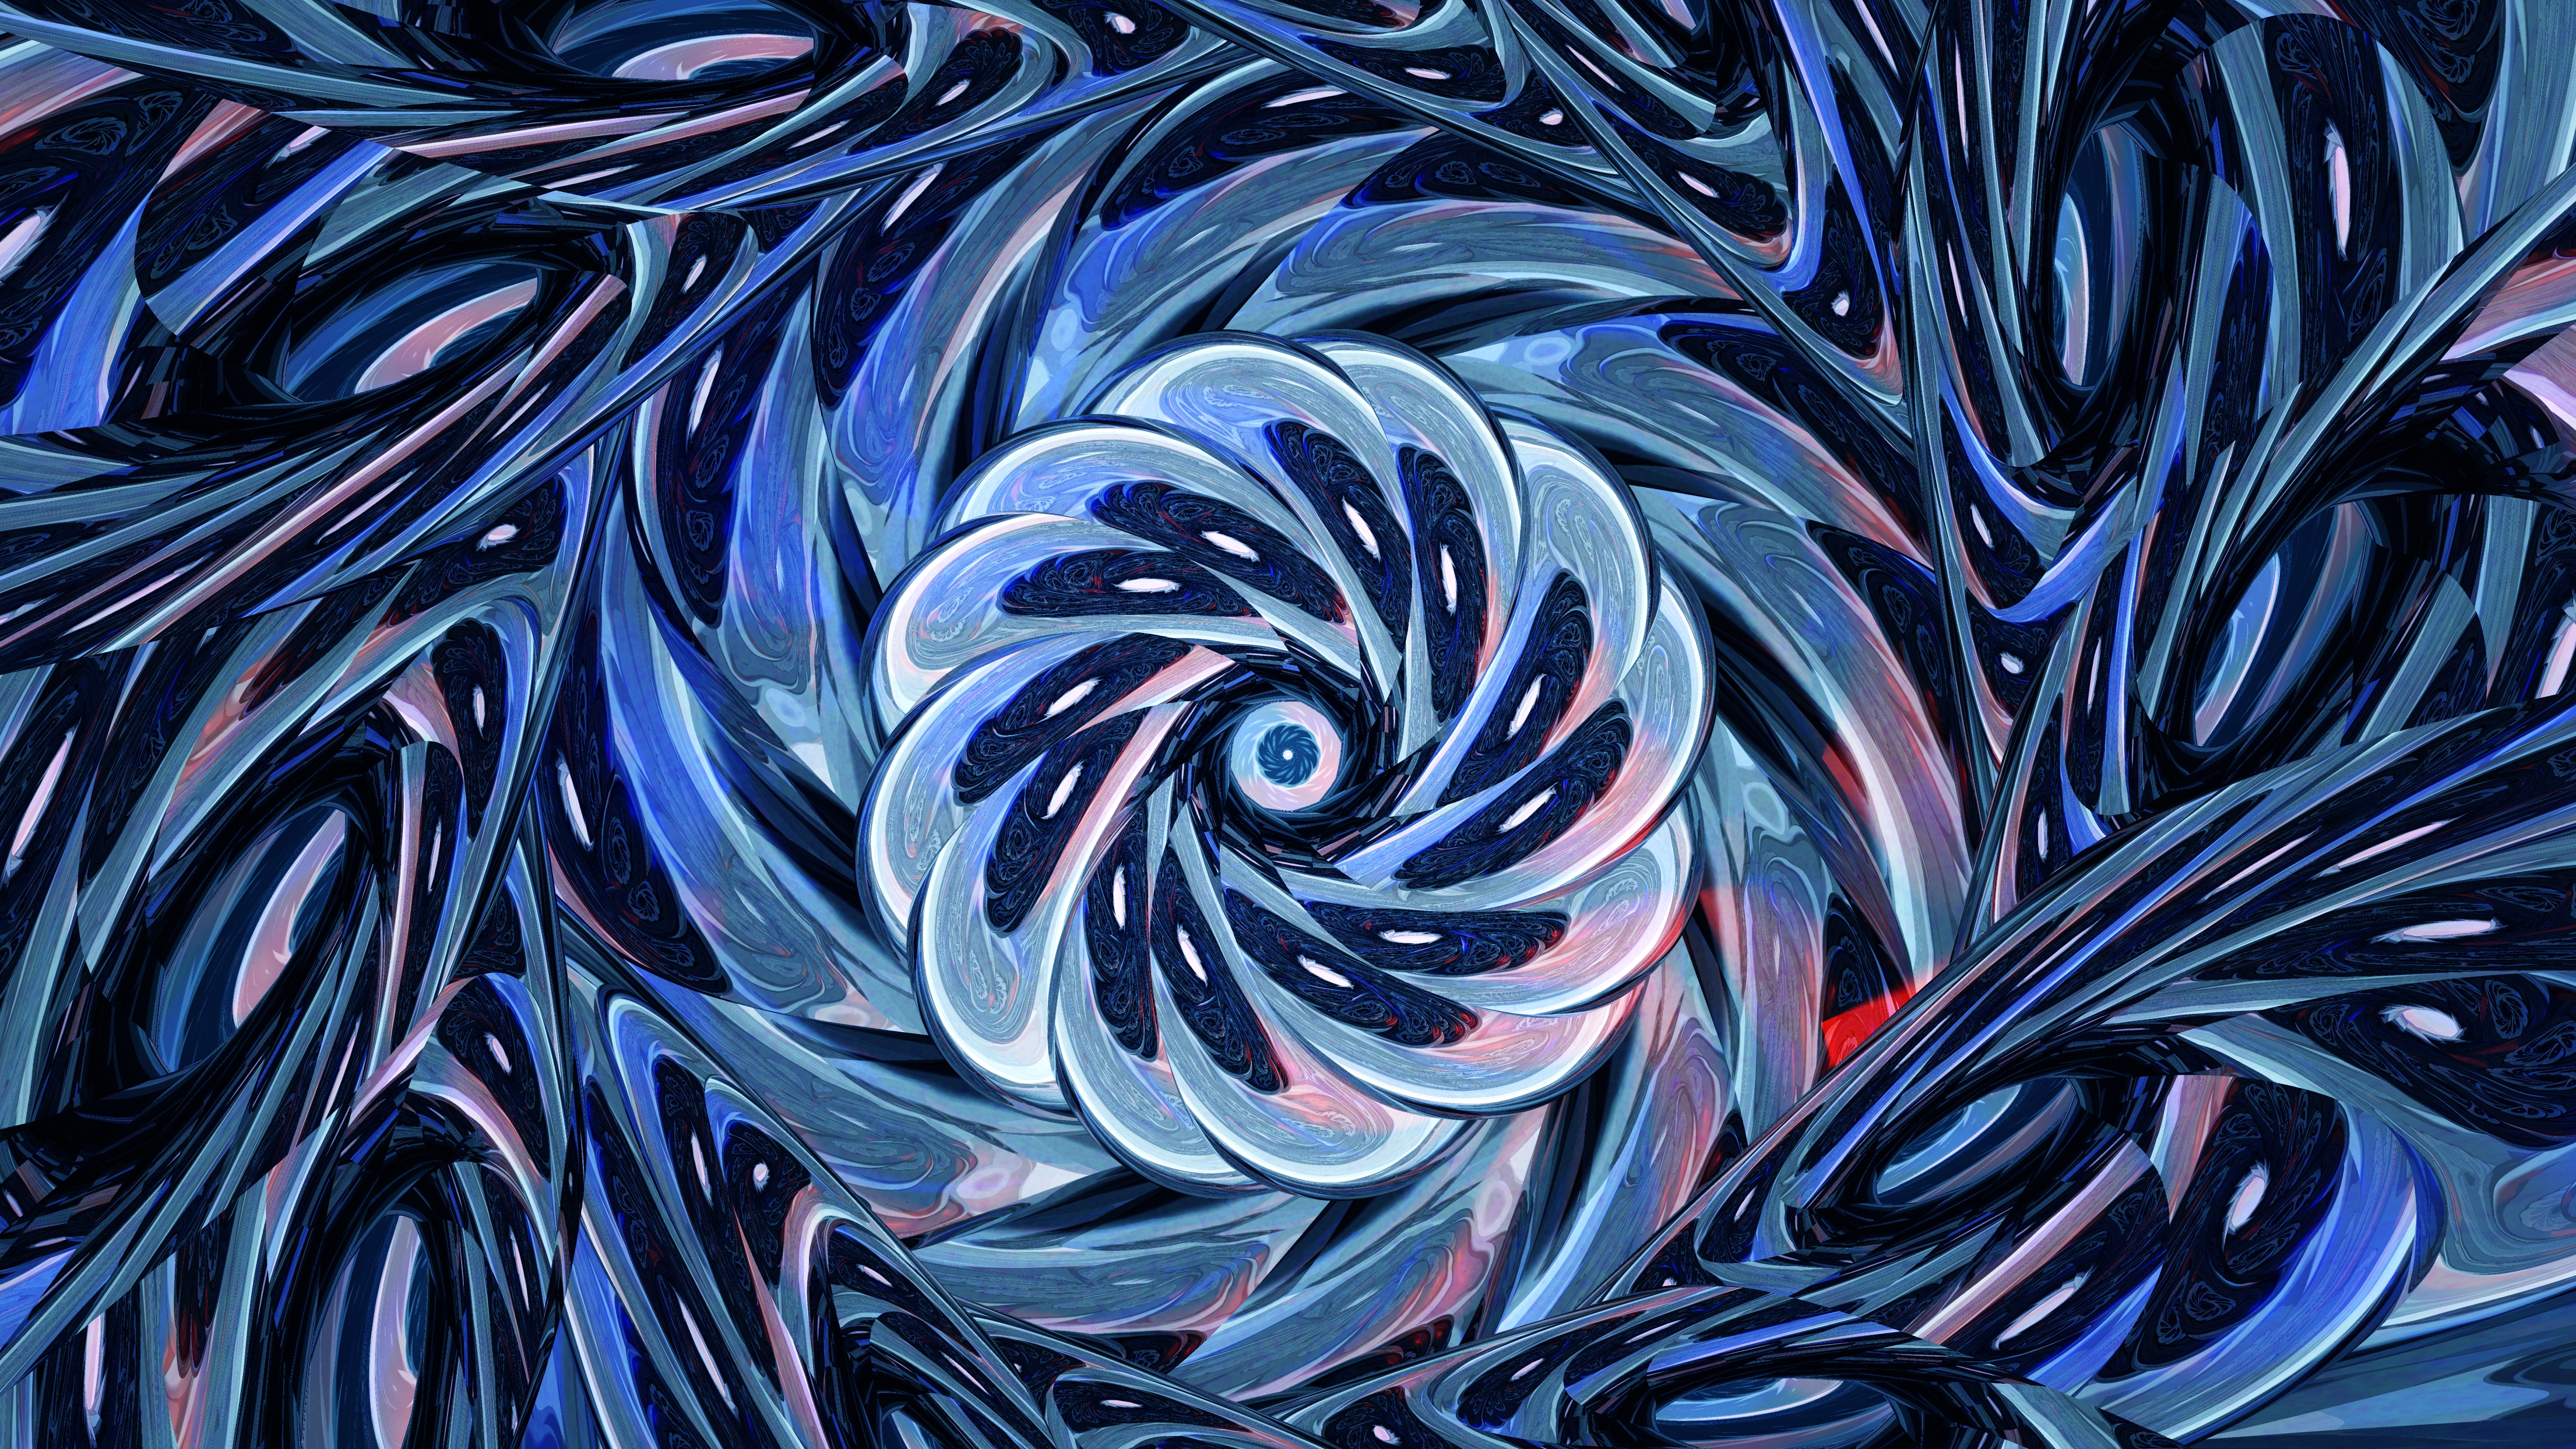 digital, abstract, fractal, confused, intricate, swirling, involute